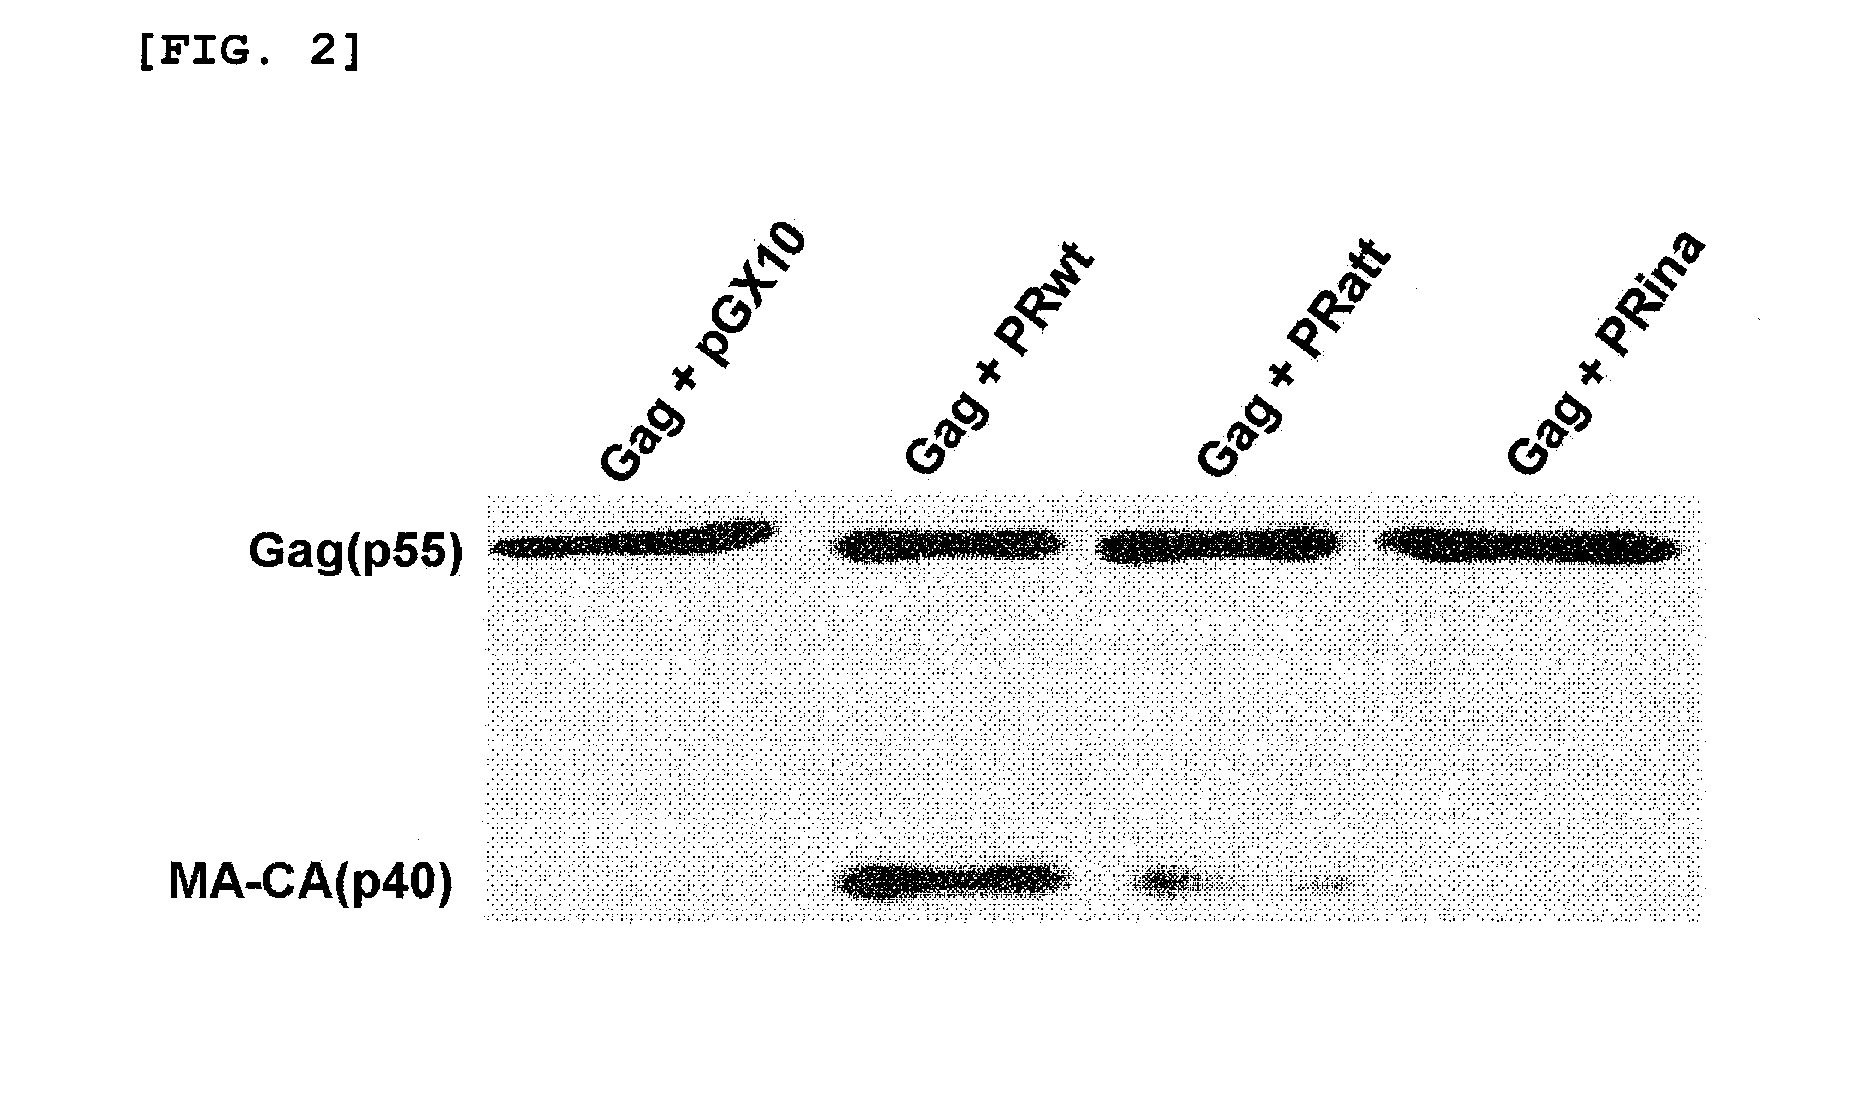 Use of mutant hiv-1 protease or siv protease as an adjuvant